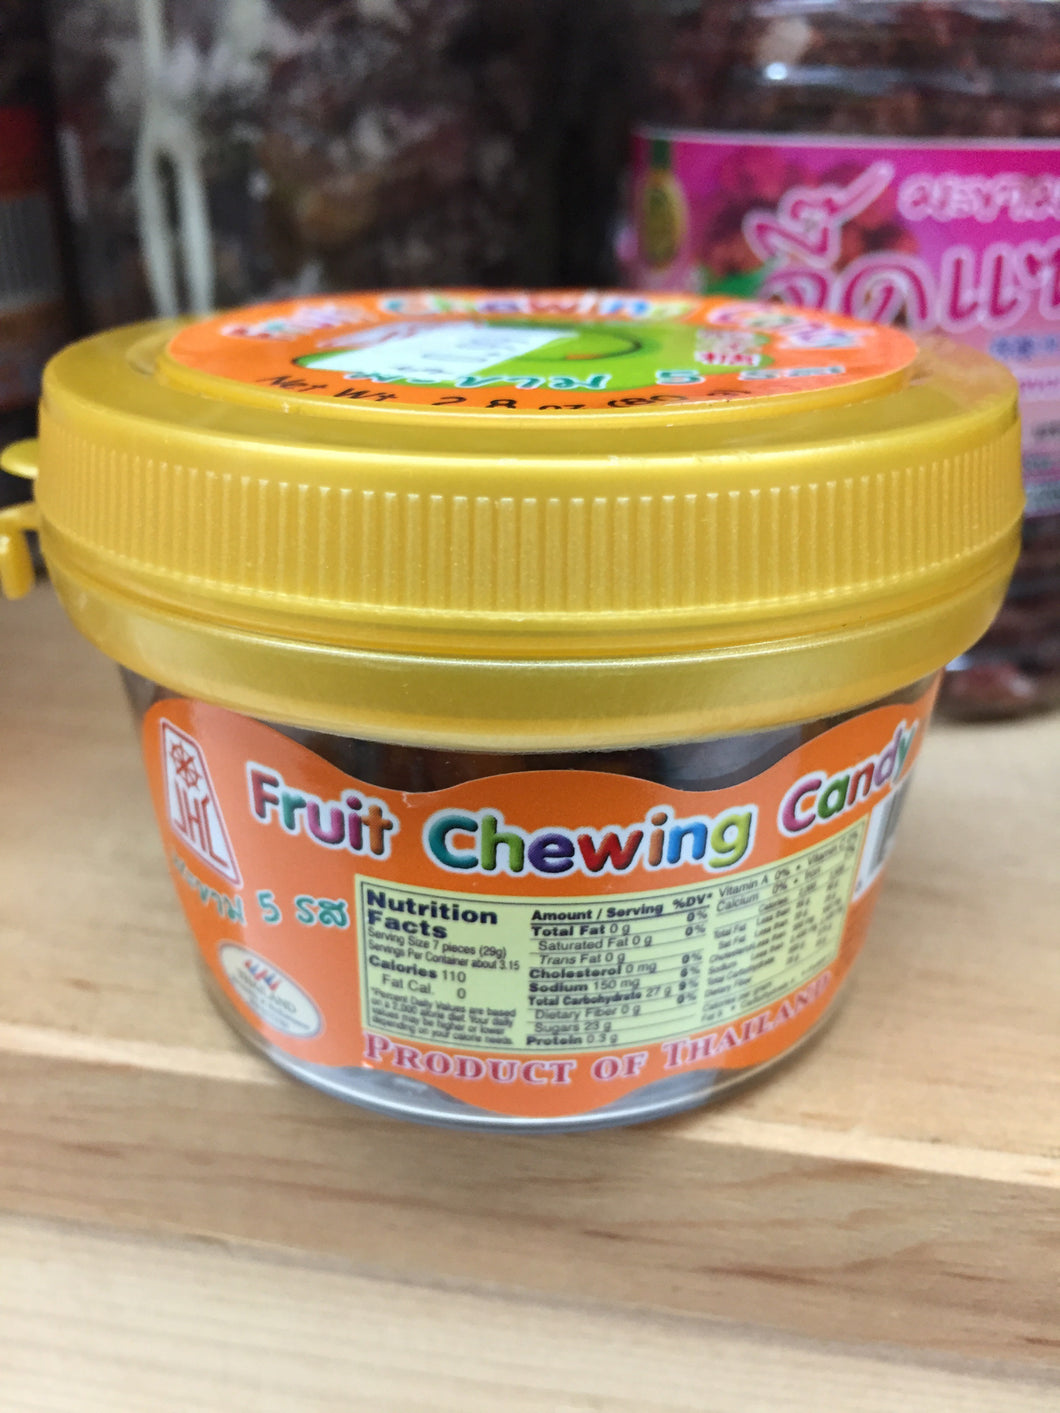 JHC - Tamarind Fruit Chewing Candy มะขาม 5 รส